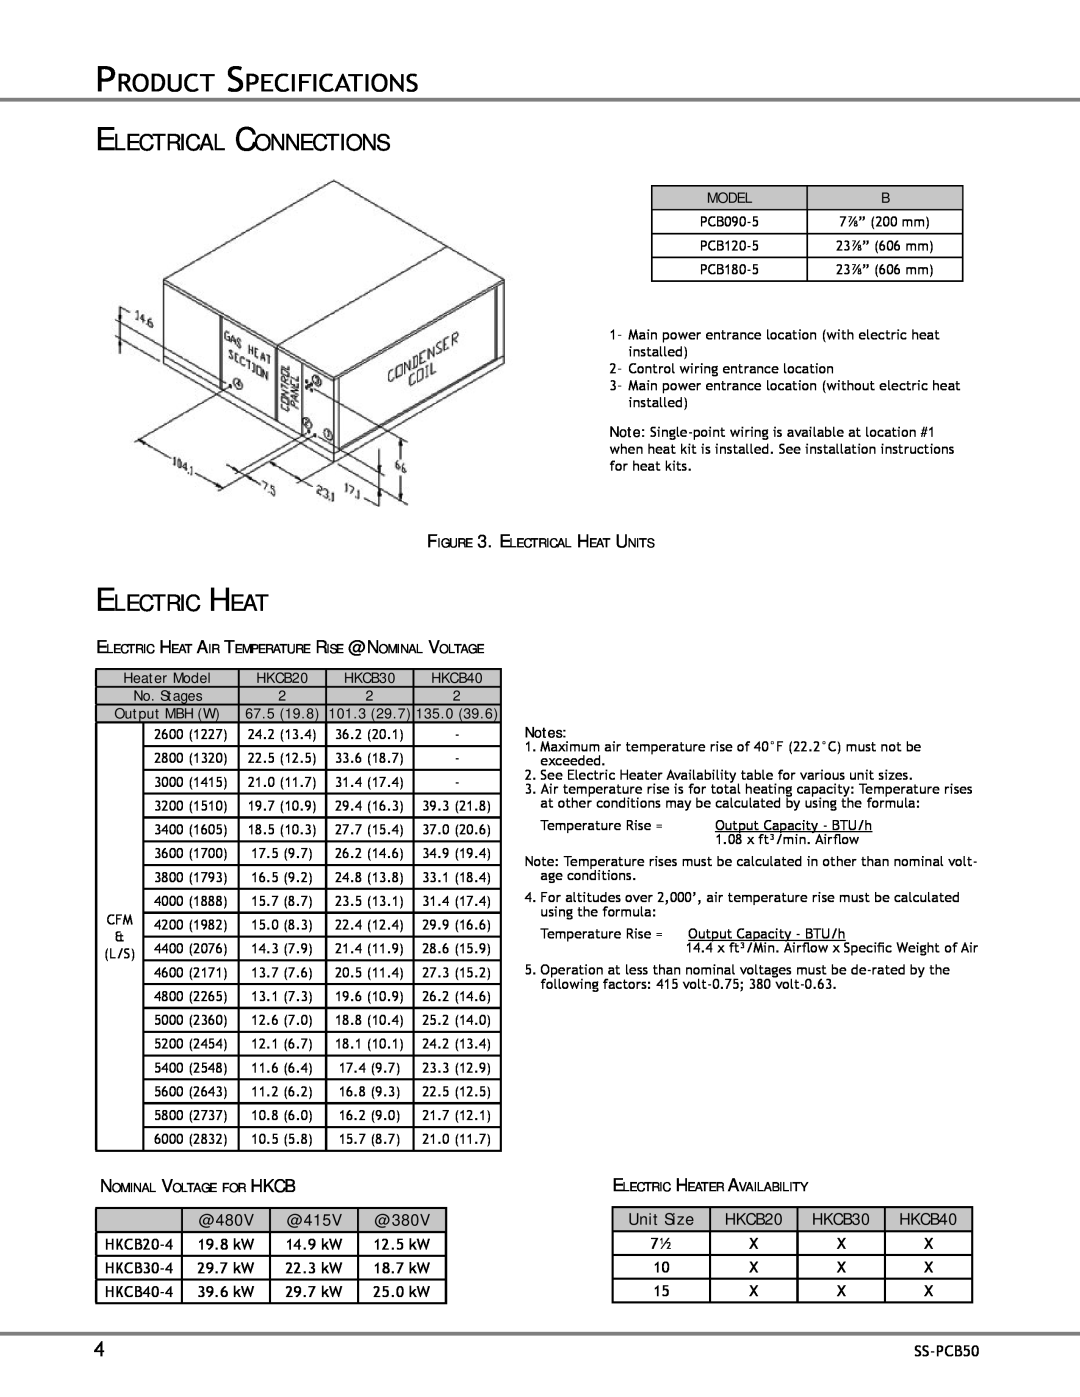 Franklin SS-PCB50 Electrical Connections, Electric Heat, Product Specifications, Unit Size, HKCB20, HKCB30, HKCB40 